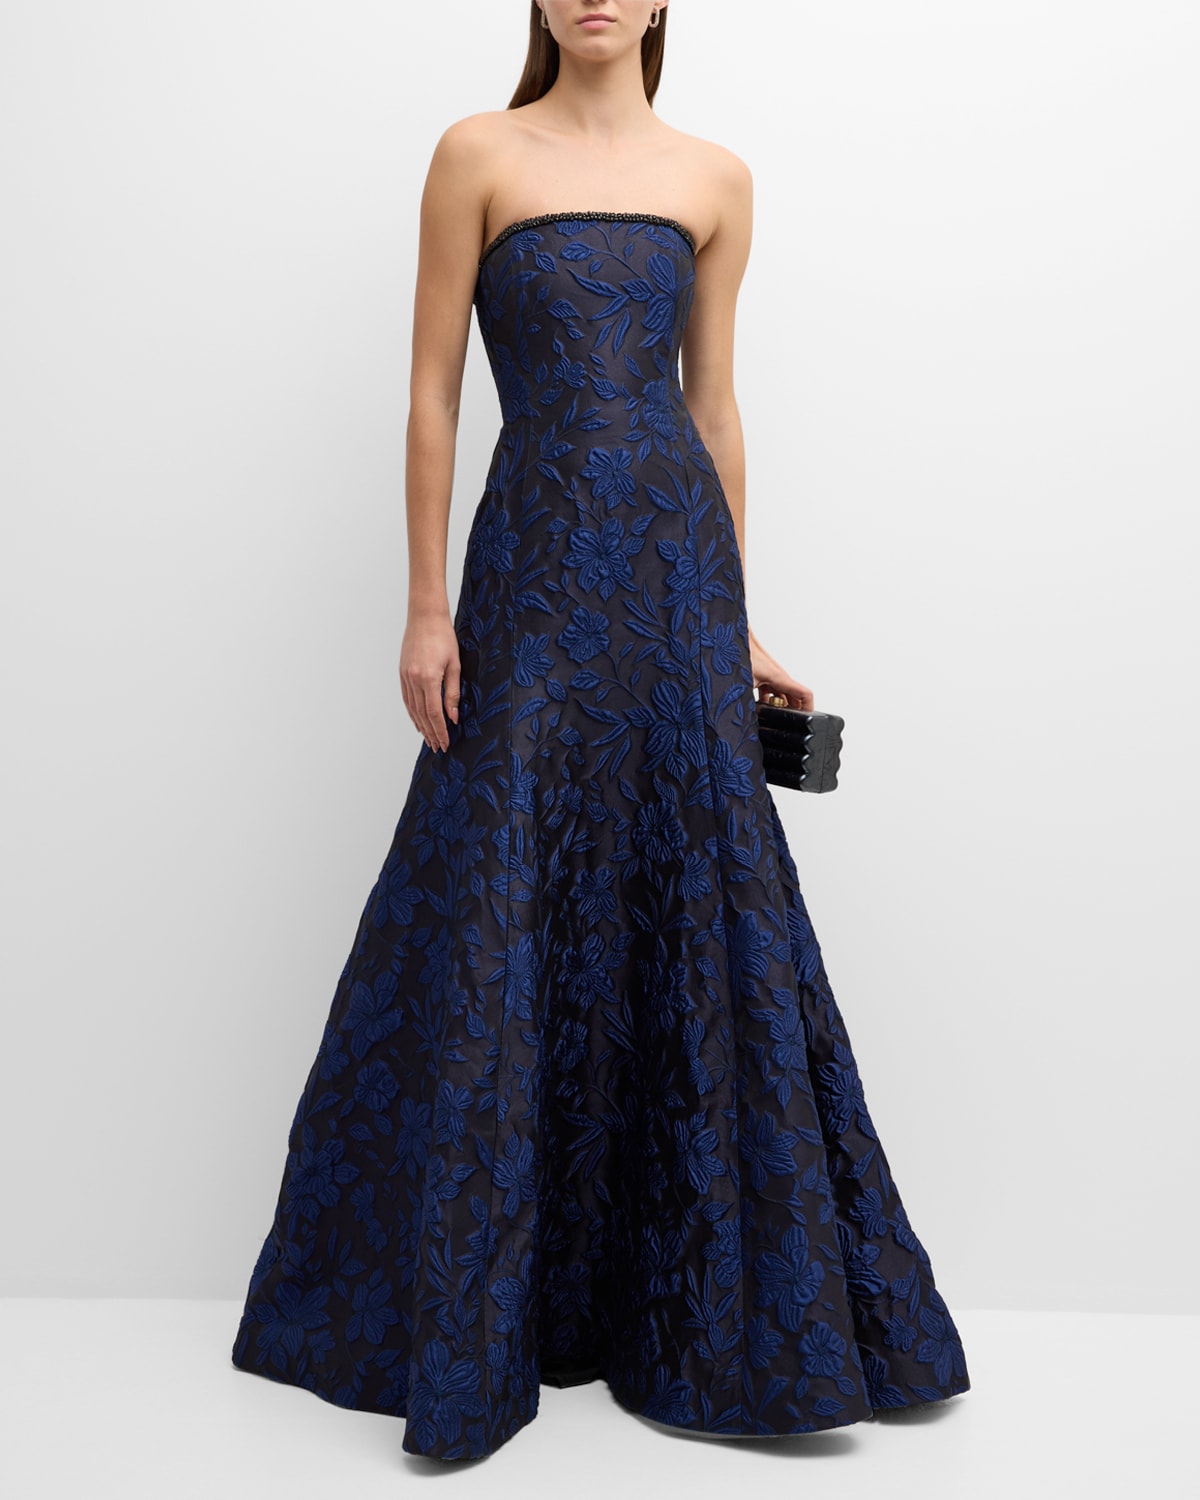 NAEEM KHAN BLUE JACQUARD GOWN WITH EMBROIDERED DETAIL